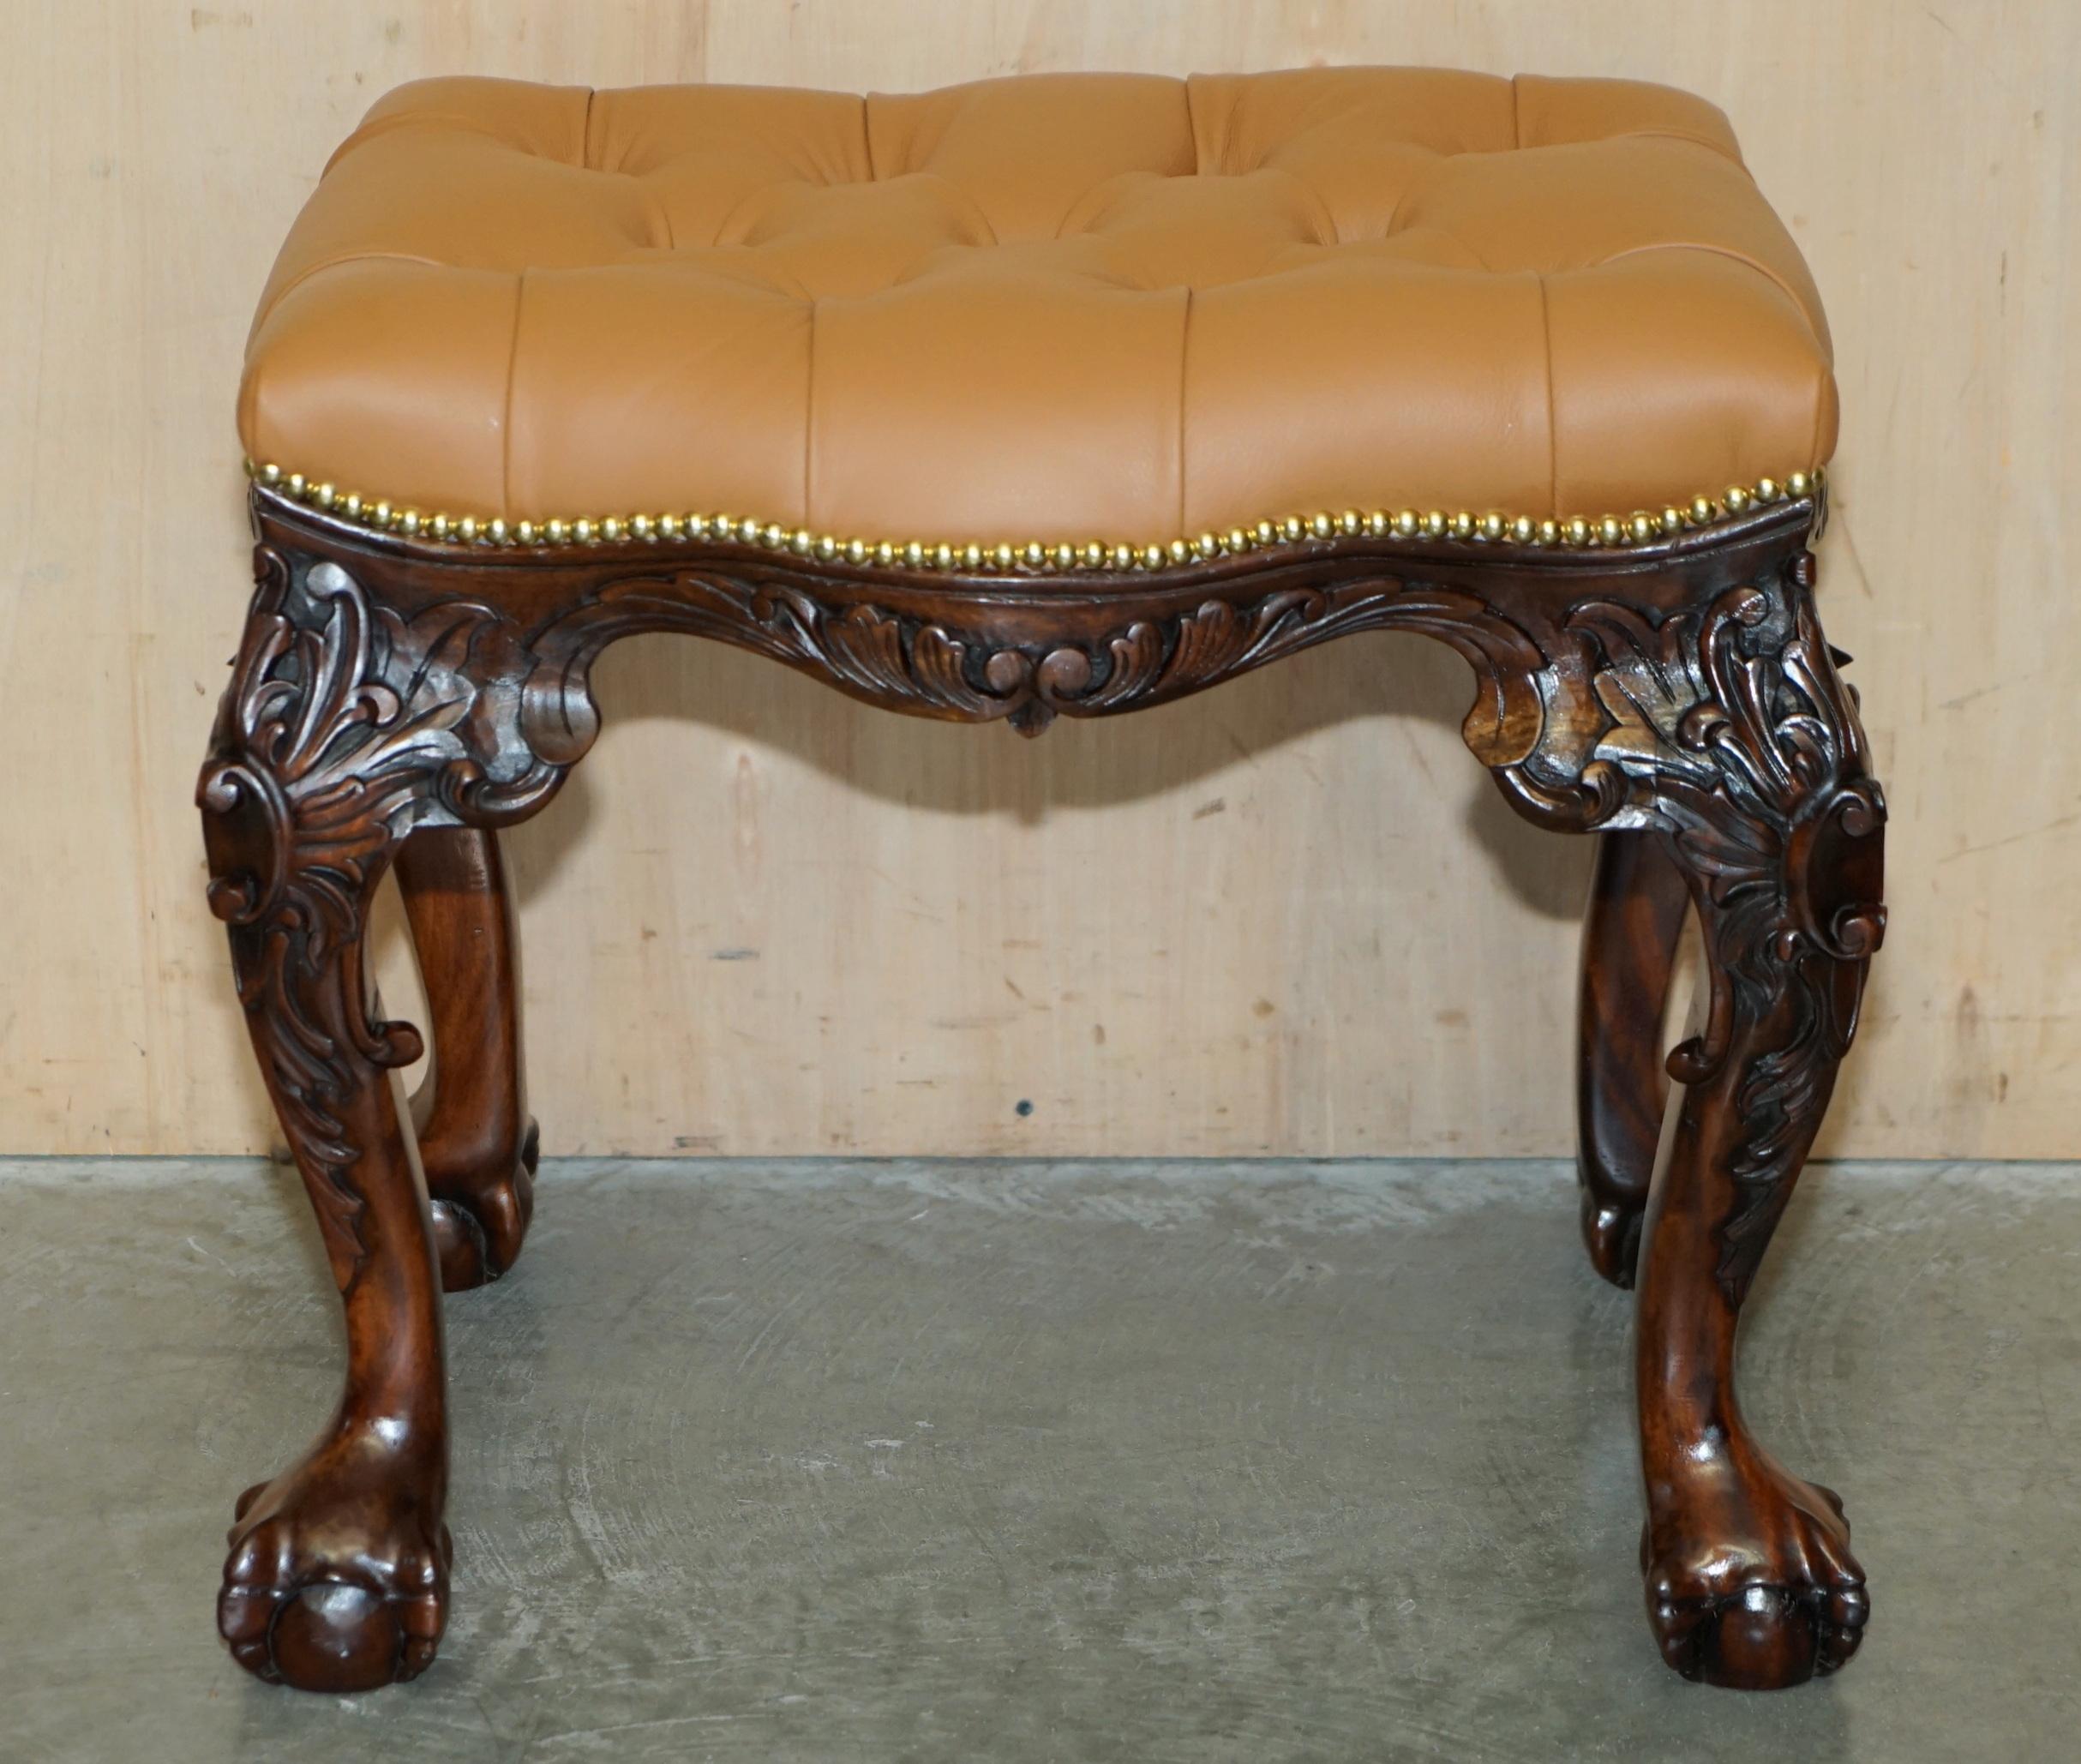 RESTORATED BROWN LEATHER CLAW & BALL CHESTERFIELD PIANO OR DRESSiNG TABLE STOOL (Art déco) im Angebot